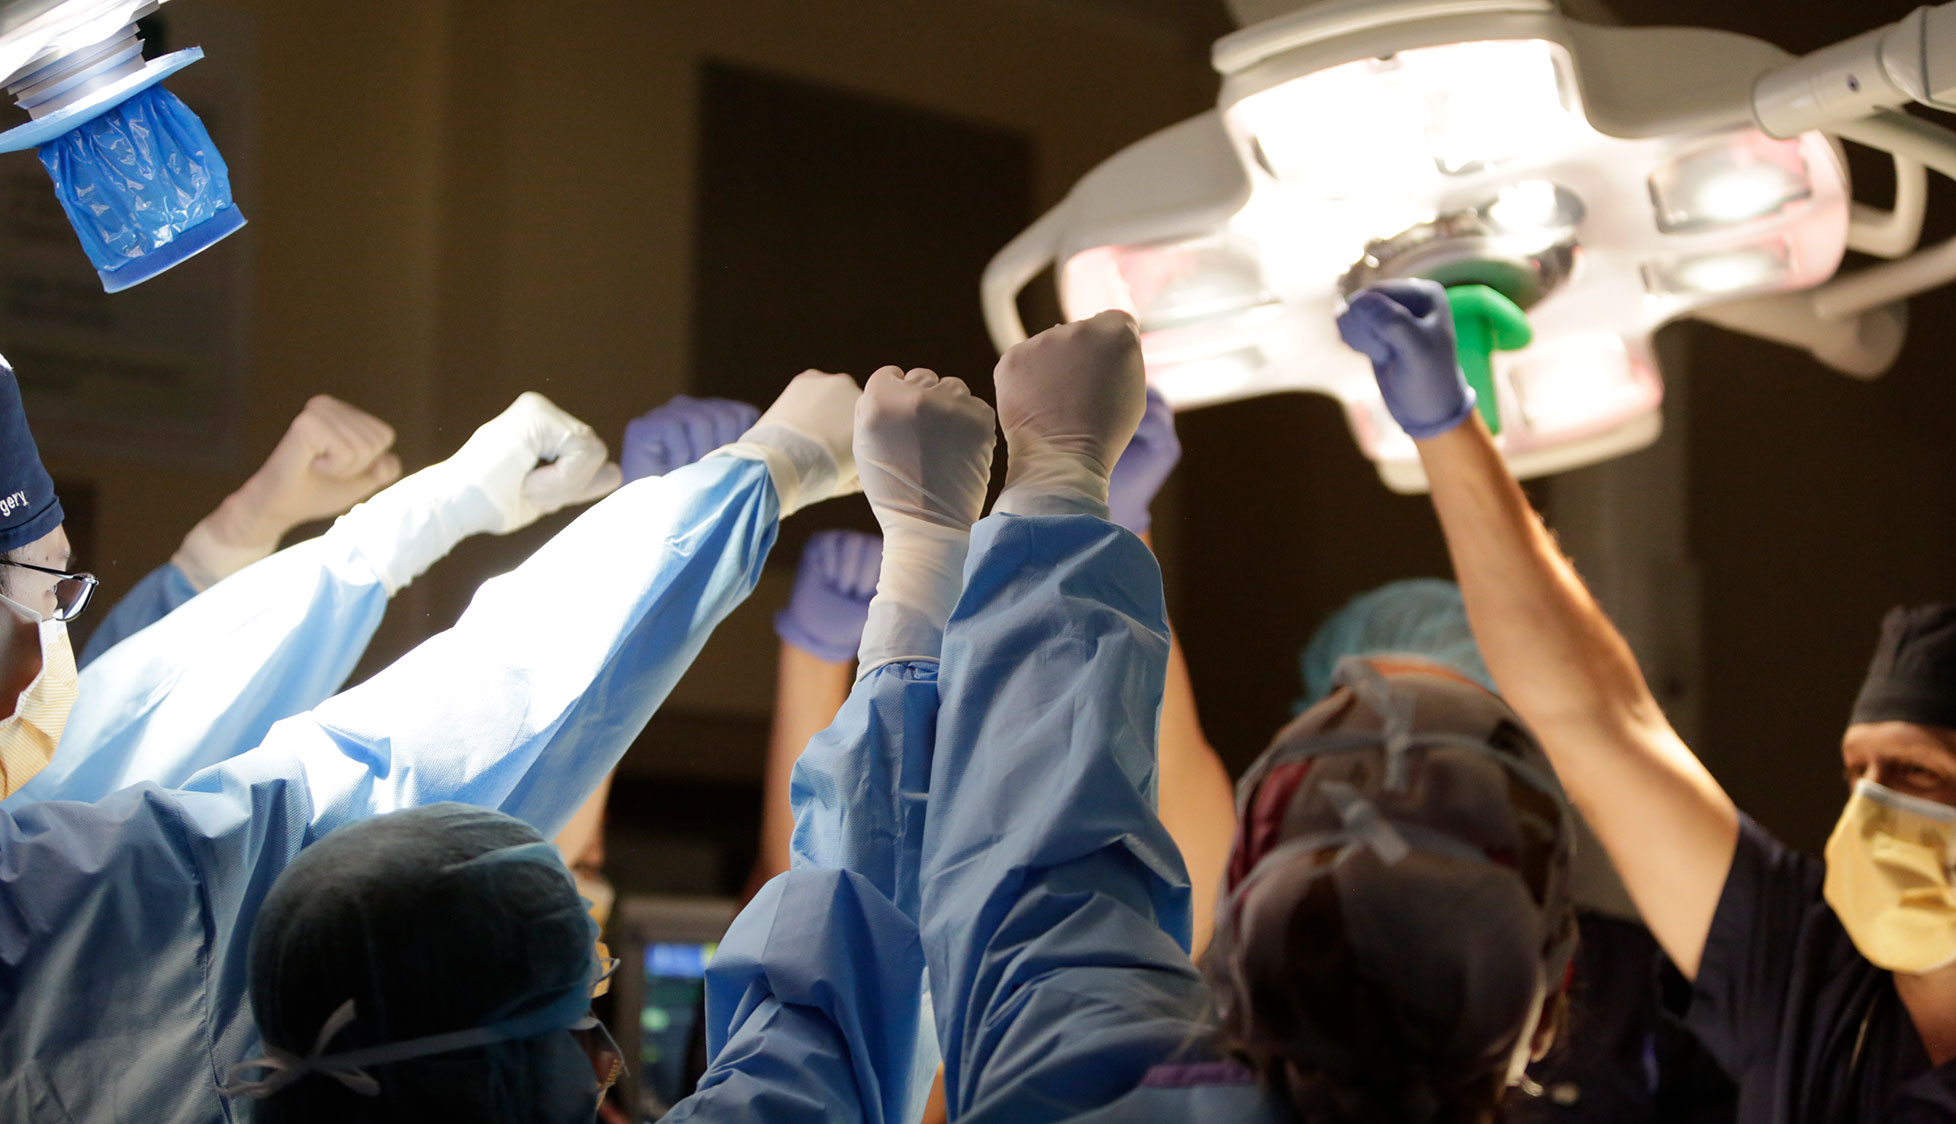 Doctors in operating room with hands raised